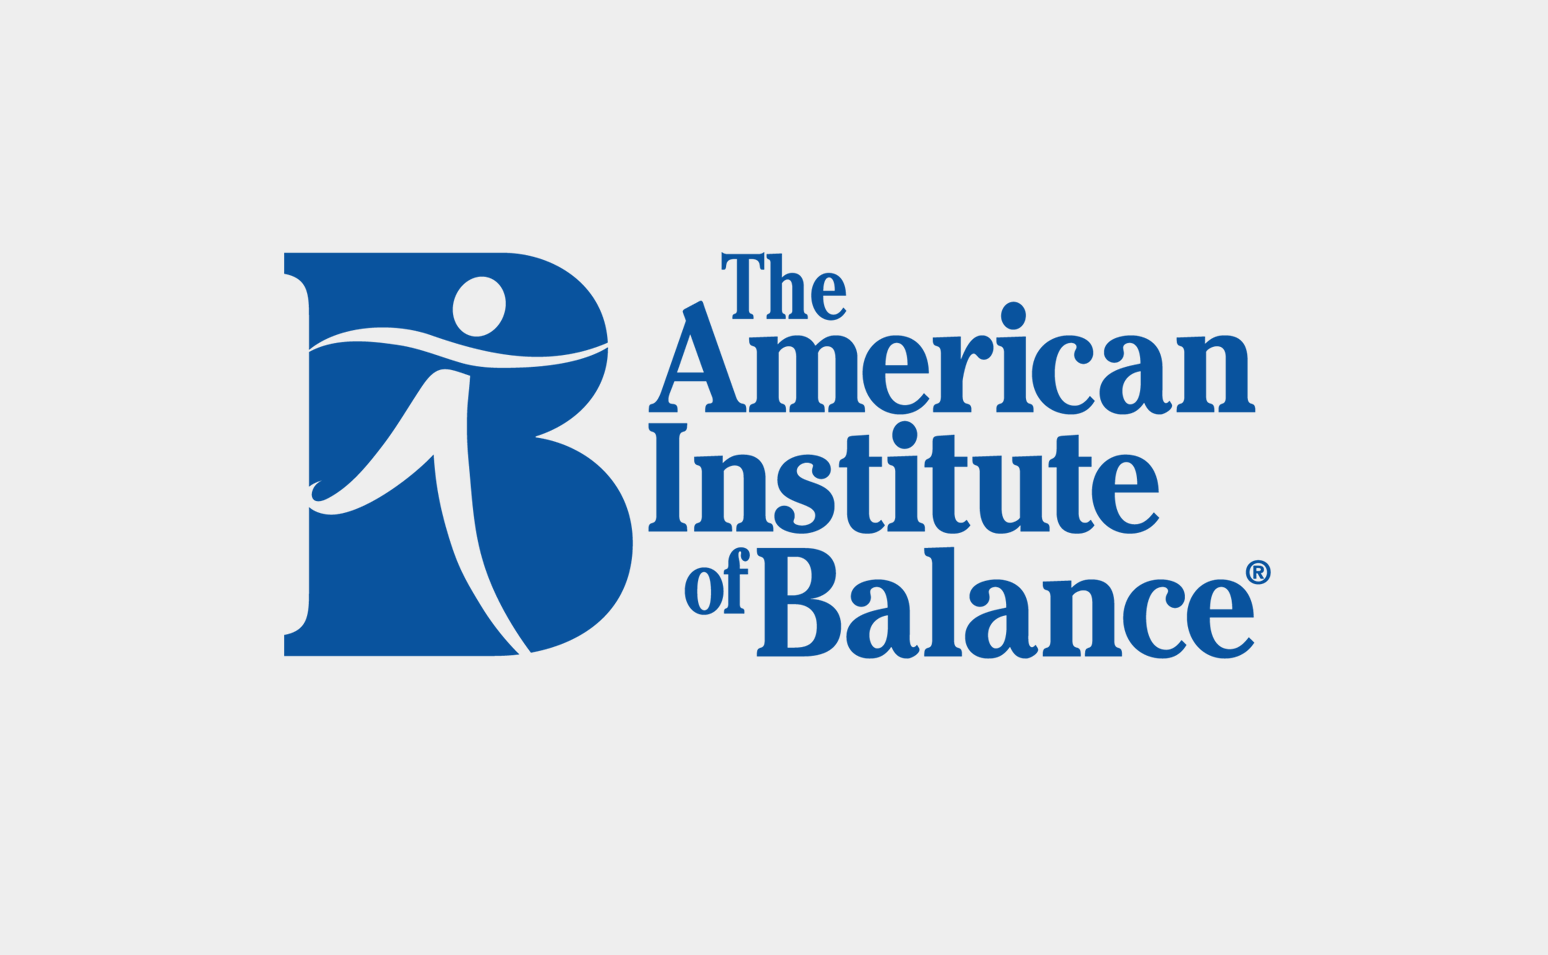 The American Institute of Balance